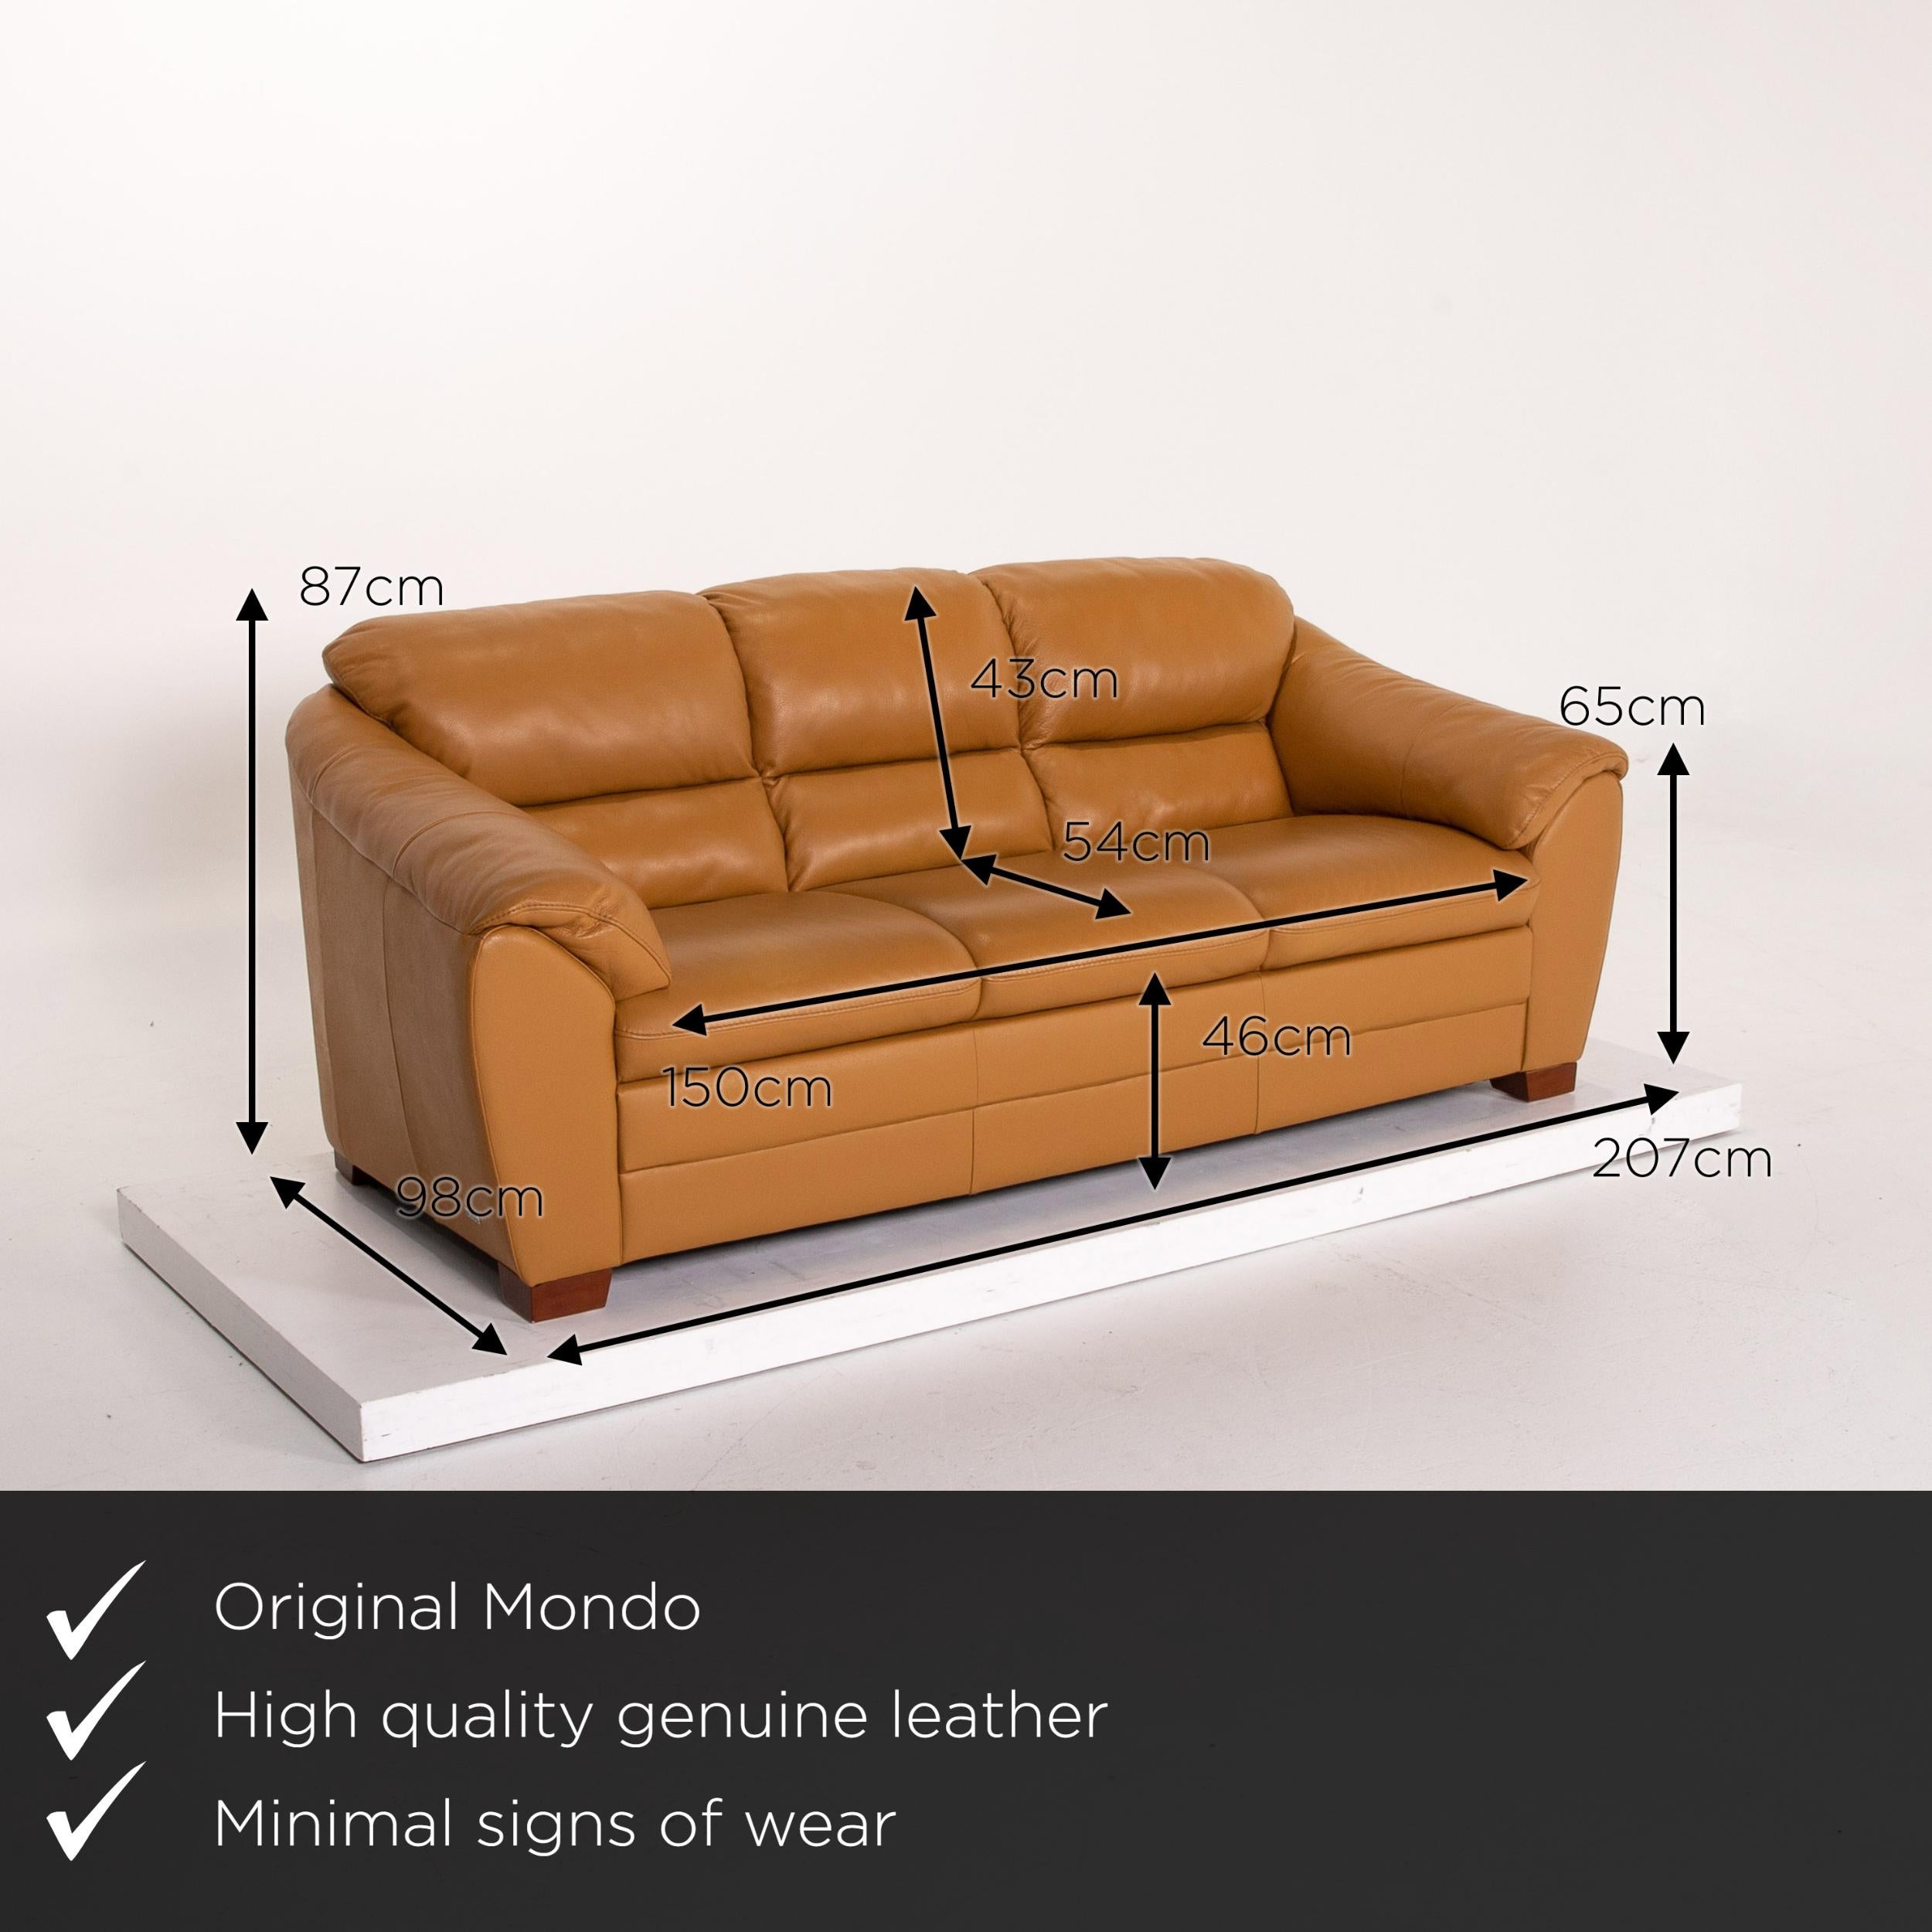 We present to you a Mondo leather sofa yellow mustard yellow two-seat couch.

 

 Product measurements in centimeters:
 

Depth 98
Width 207
Height 87
Seat height 46
Rest height 65
Seat depth 54
Seat width 150
Back height 43.
   